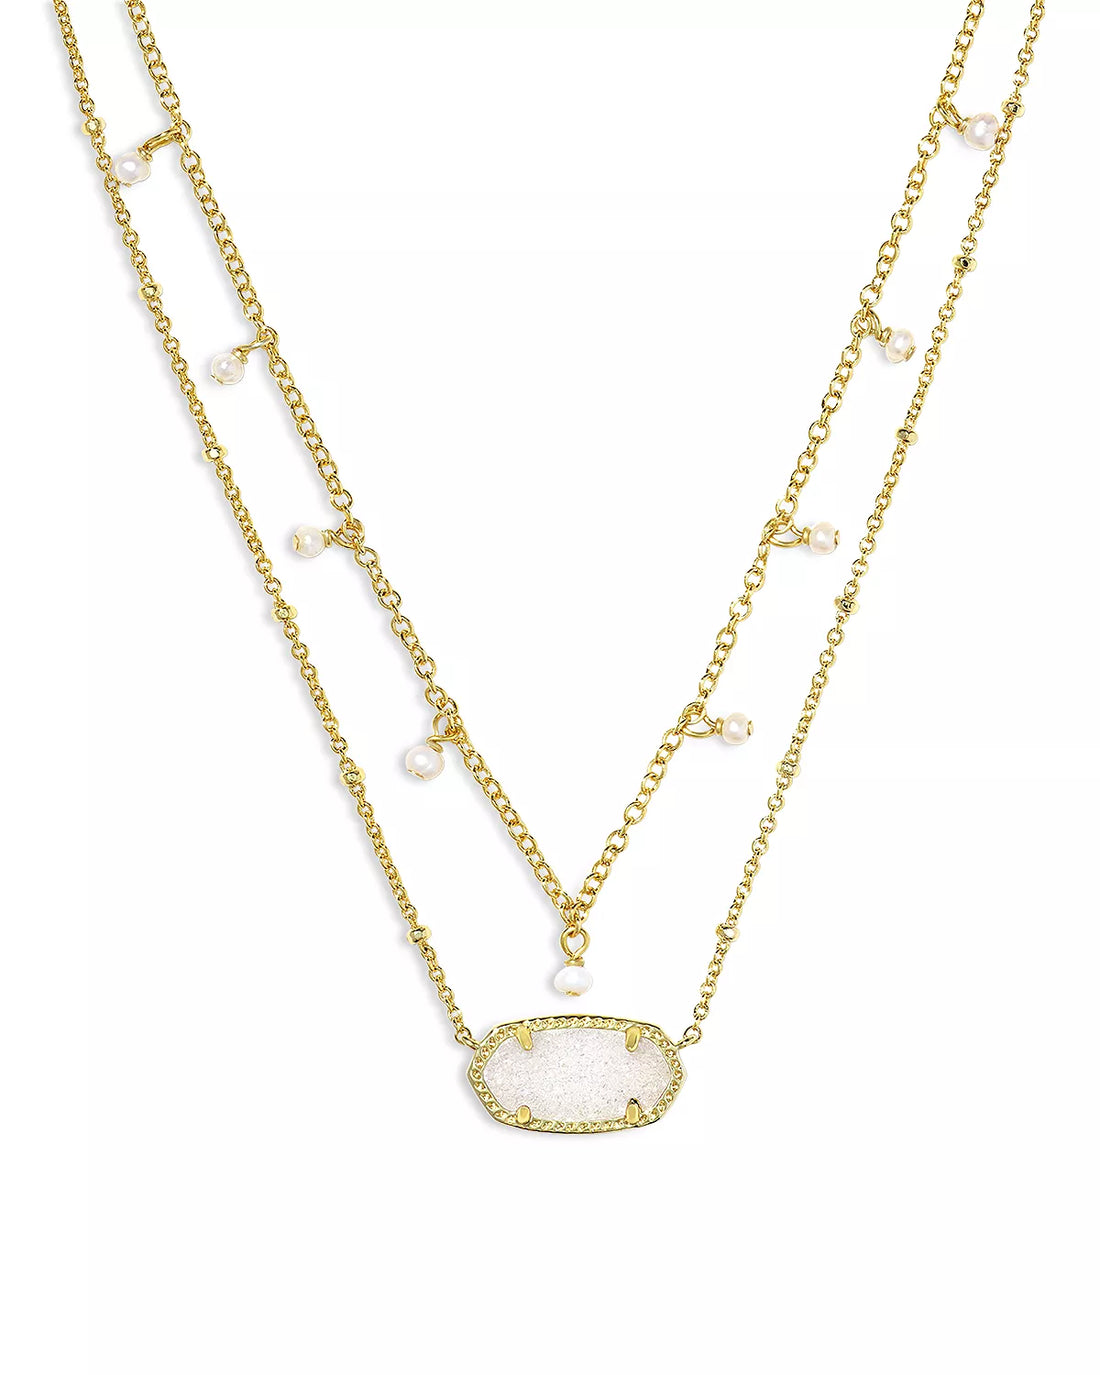 Elisa Pearl MST Necklace - Gold Iridescent Drusy